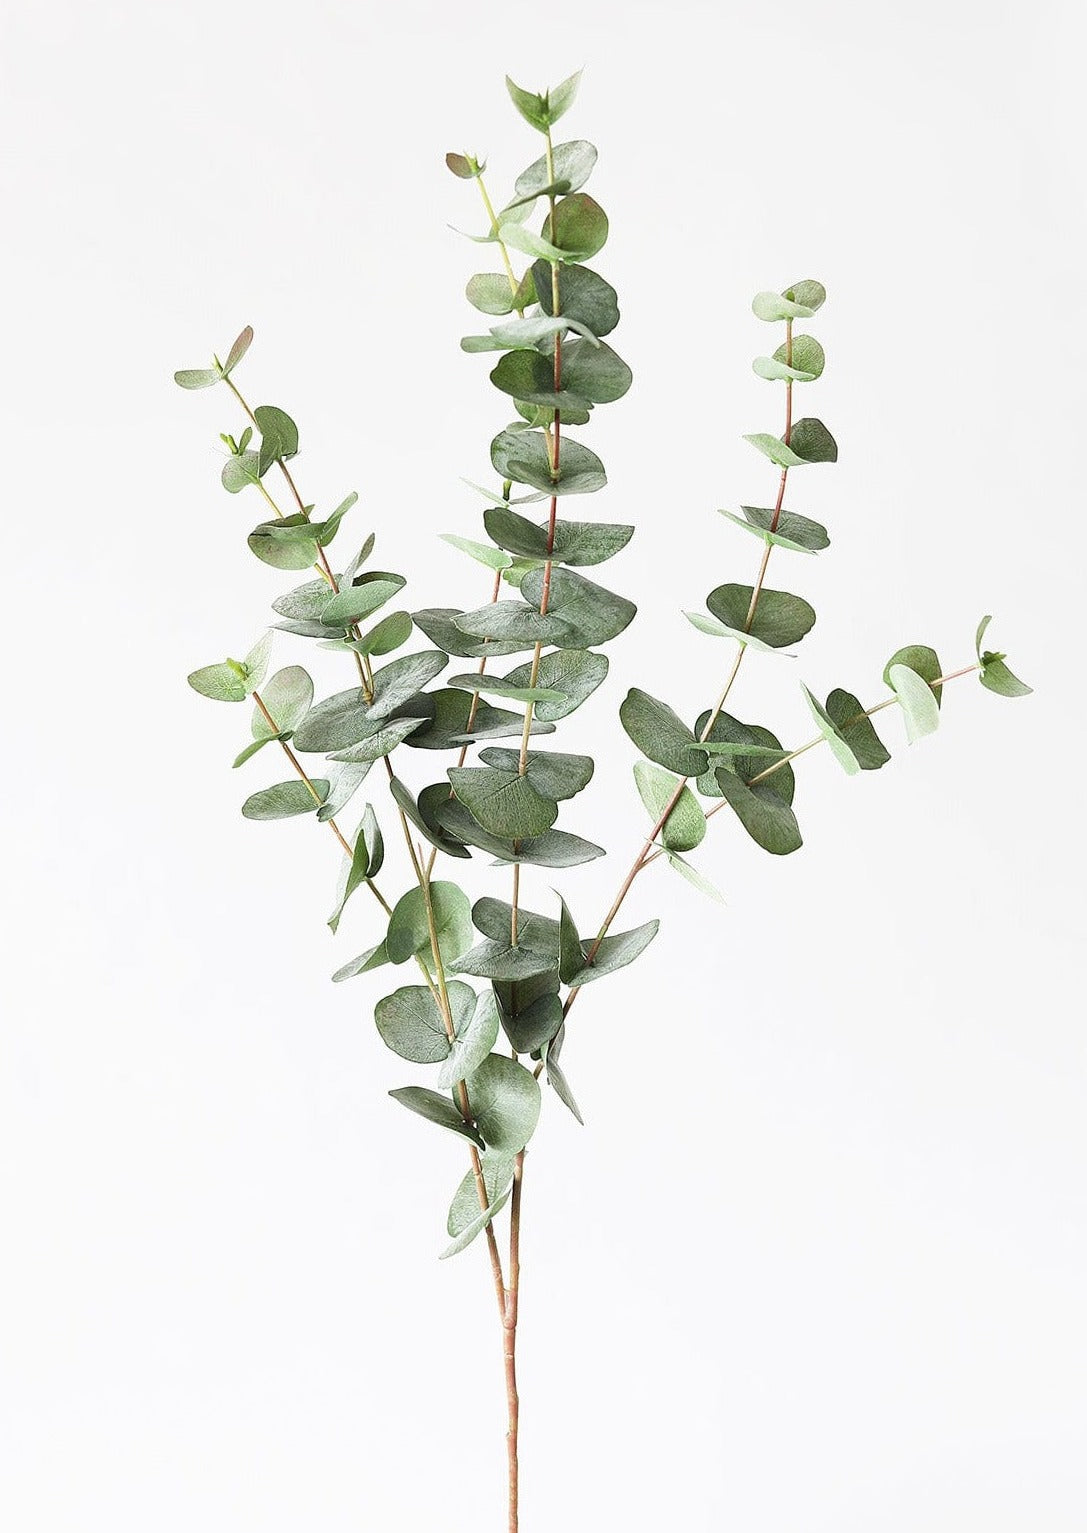 Afloral Fake Leaves Spiral Eucalyptus Branch in Gray Green